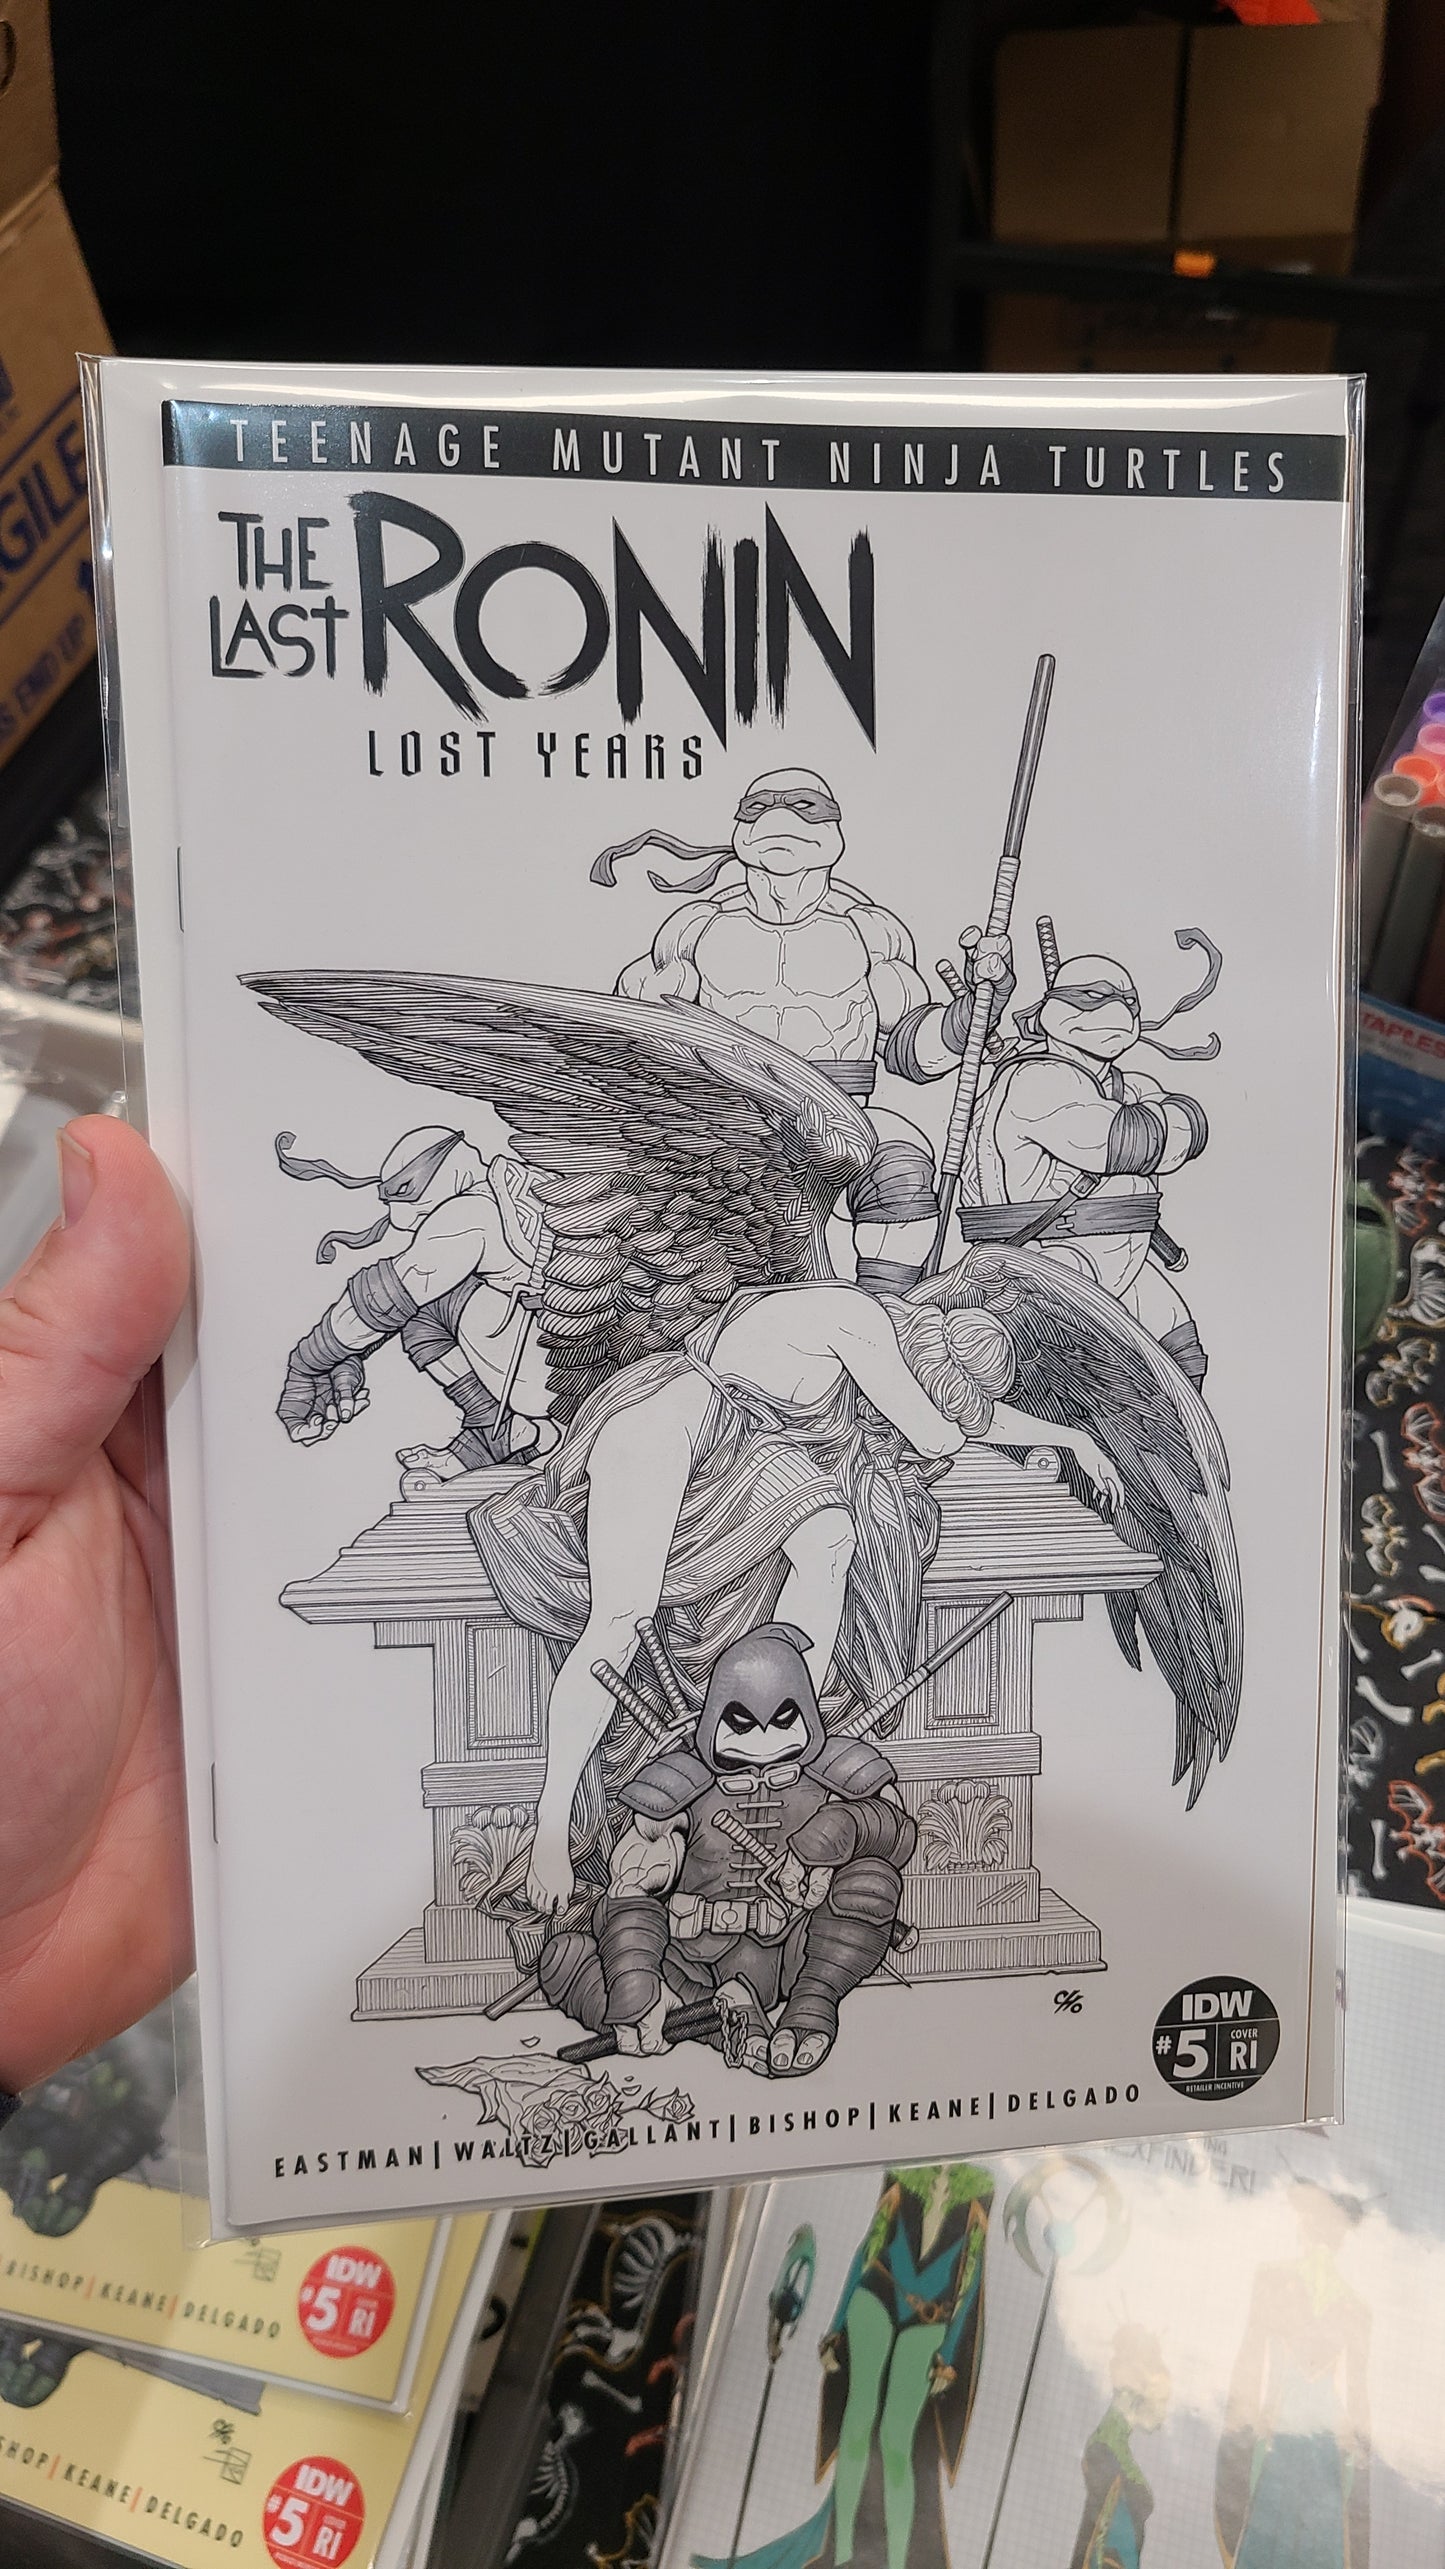 TMNT THE LAST RONIN: LOST YEARS #5 1:50 BY FRANK CHO